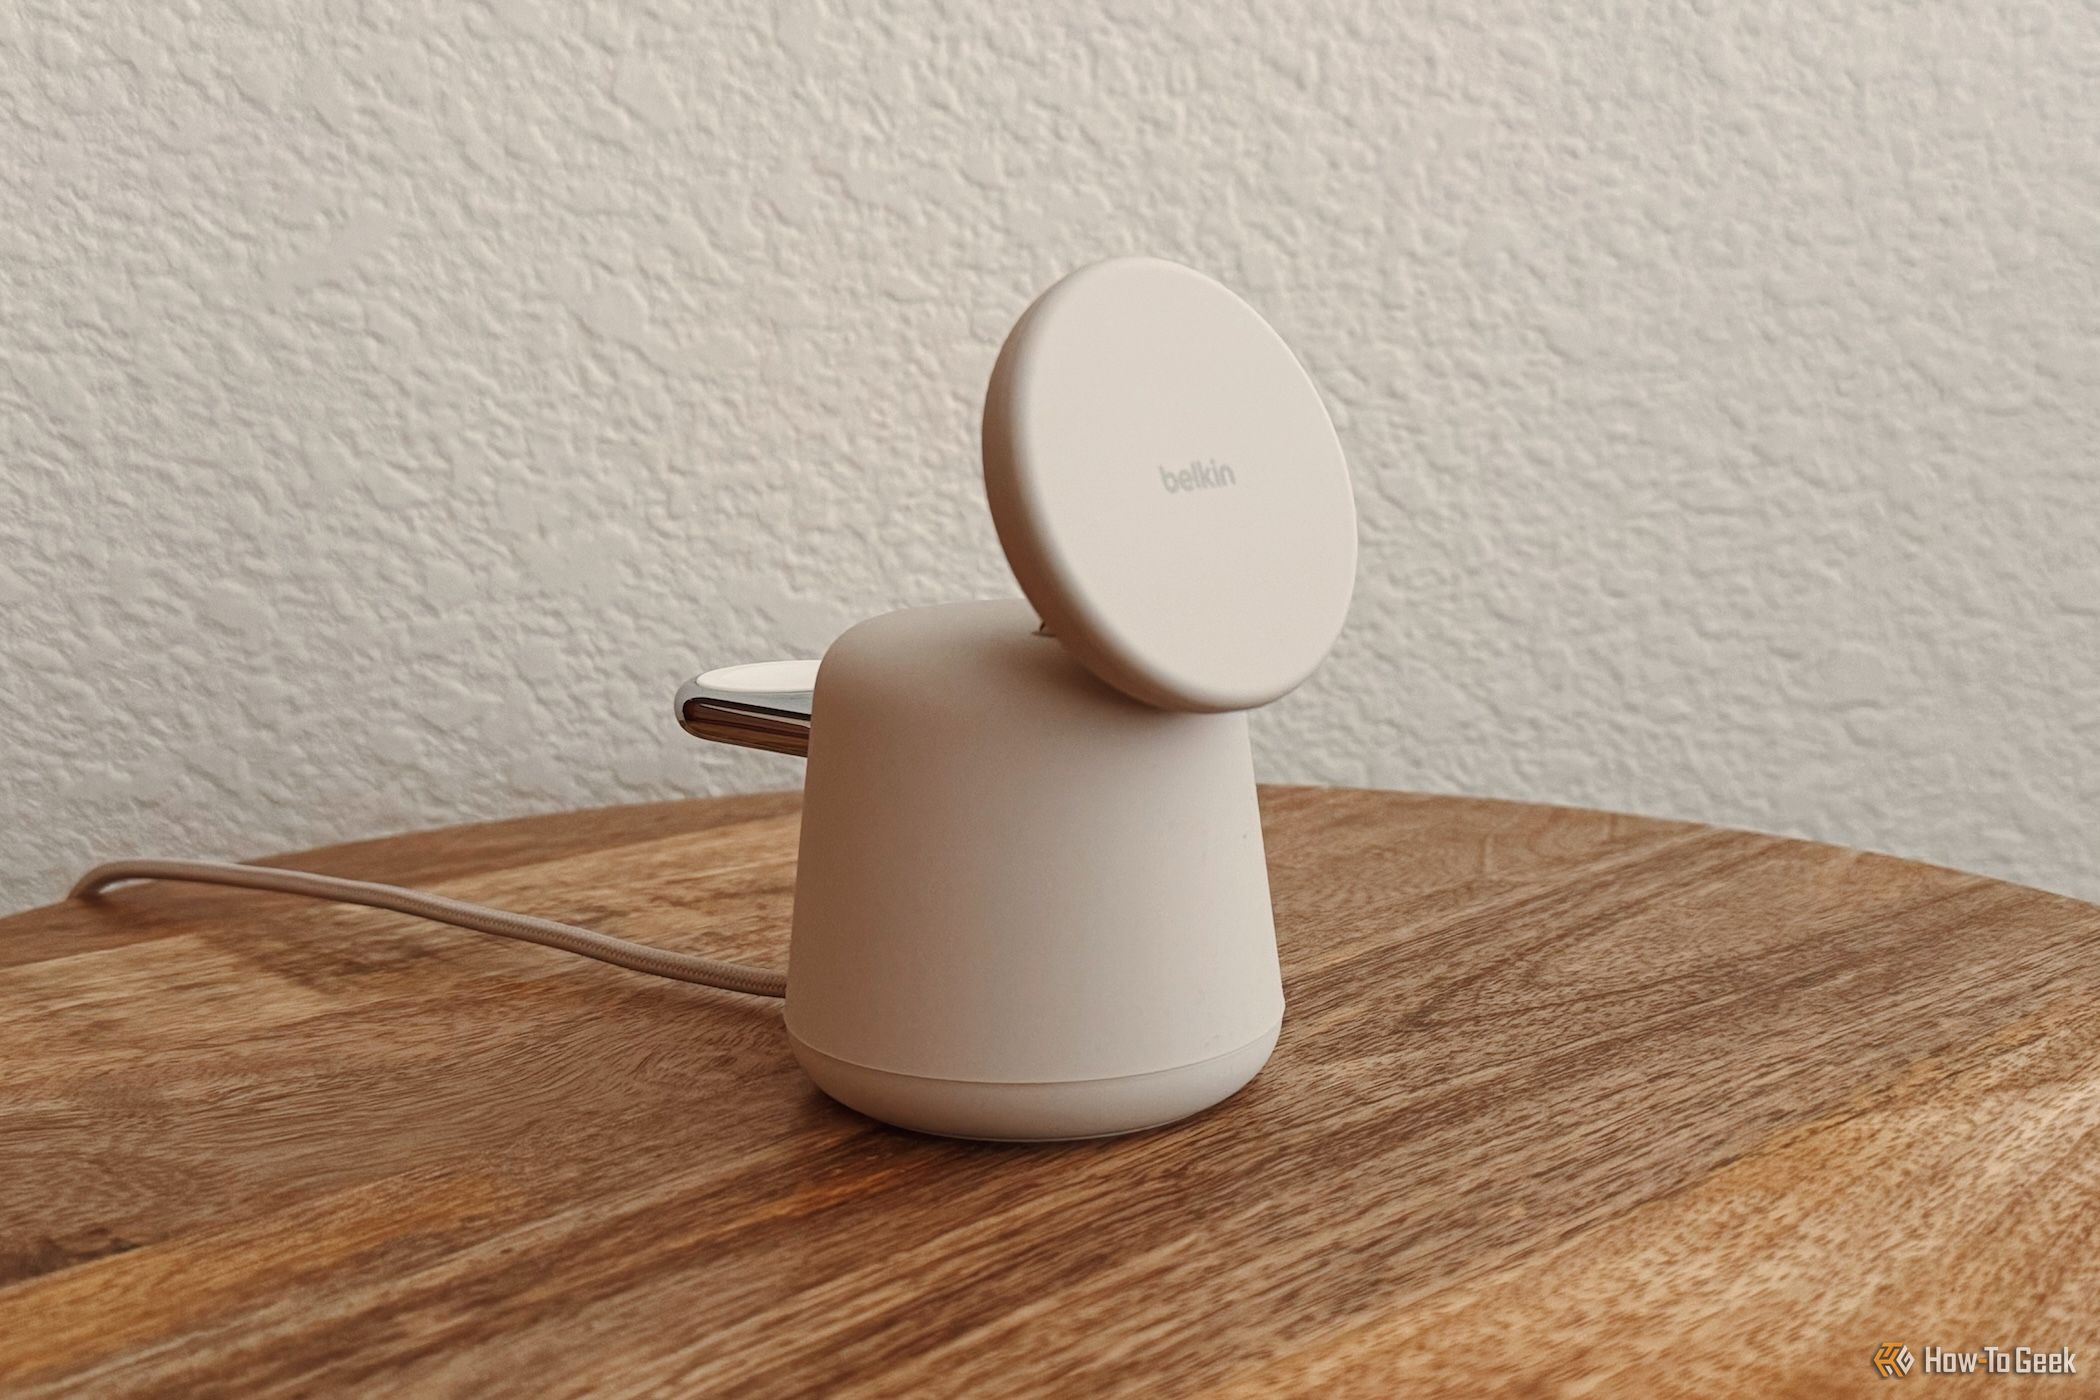 Belkin BoostCharge Pro 2-in-1 Review: Minimal MagSafe Made For StandBy